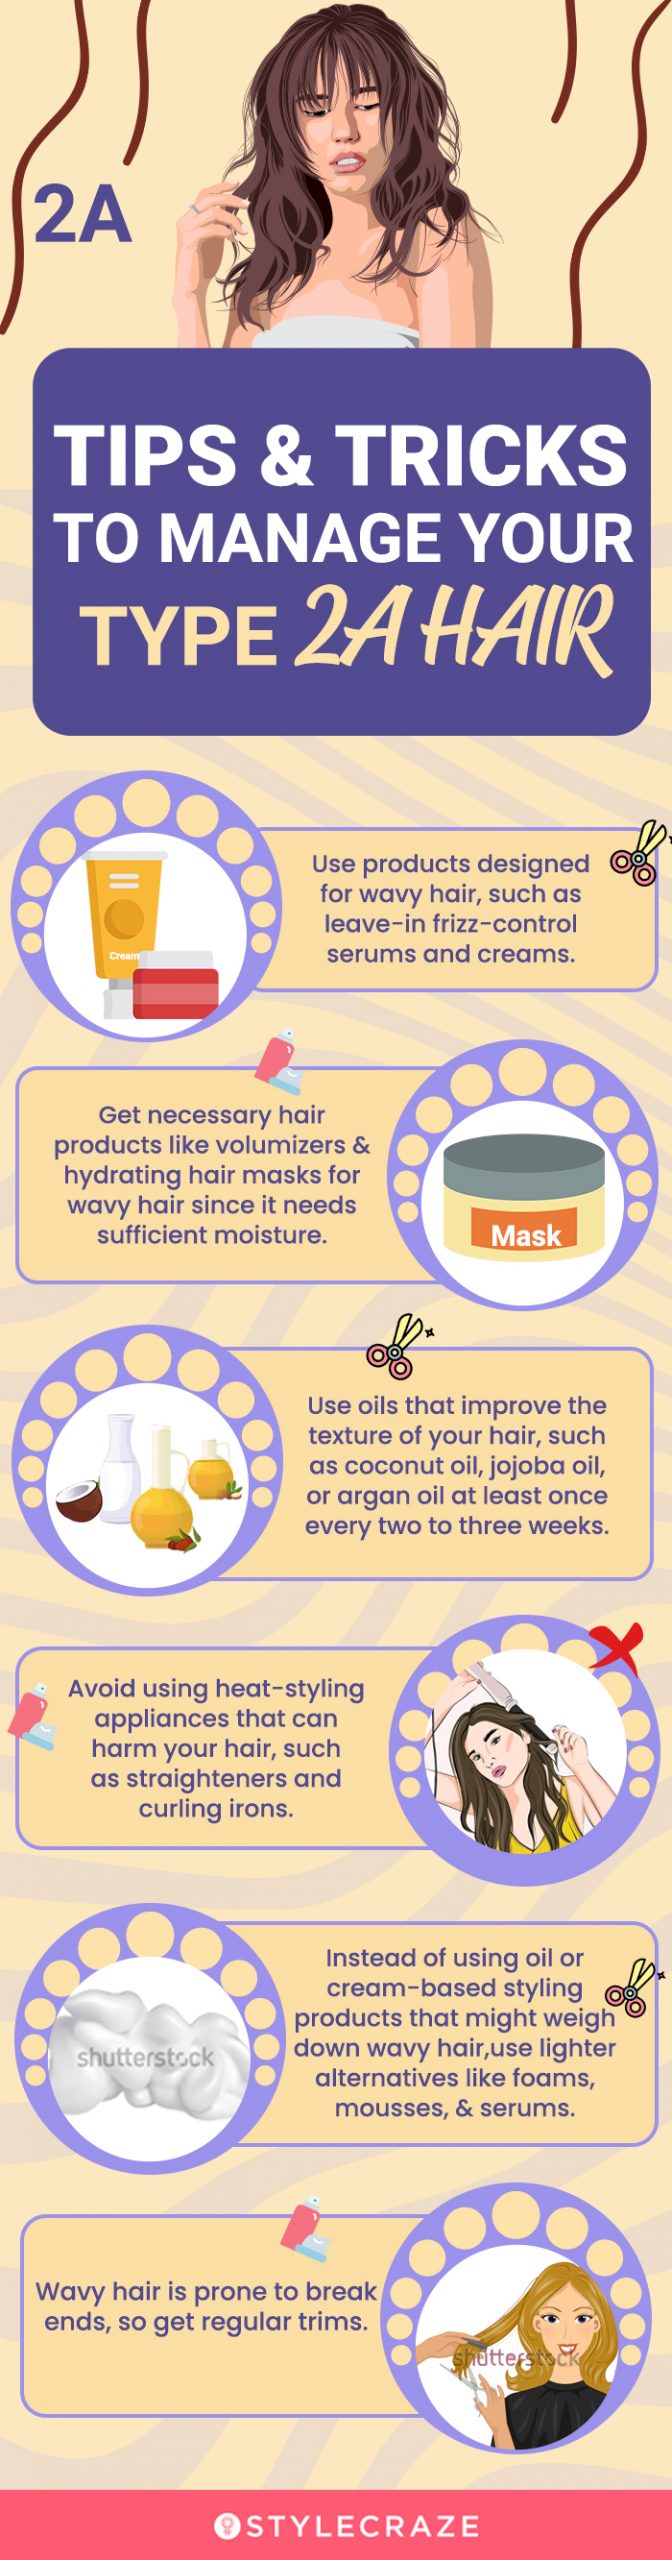 tips and tricks to manage your type 2a hair [infographic]